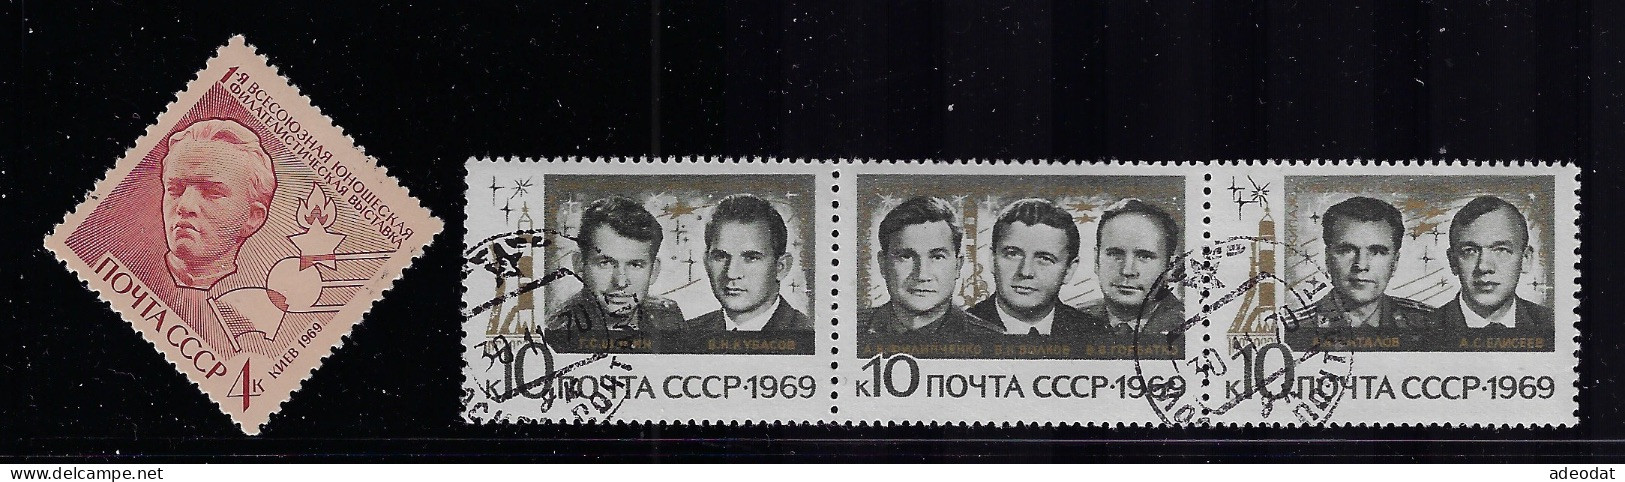 RUSSIA  1969 SCOTT #3655-3658 USED - Used Stamps